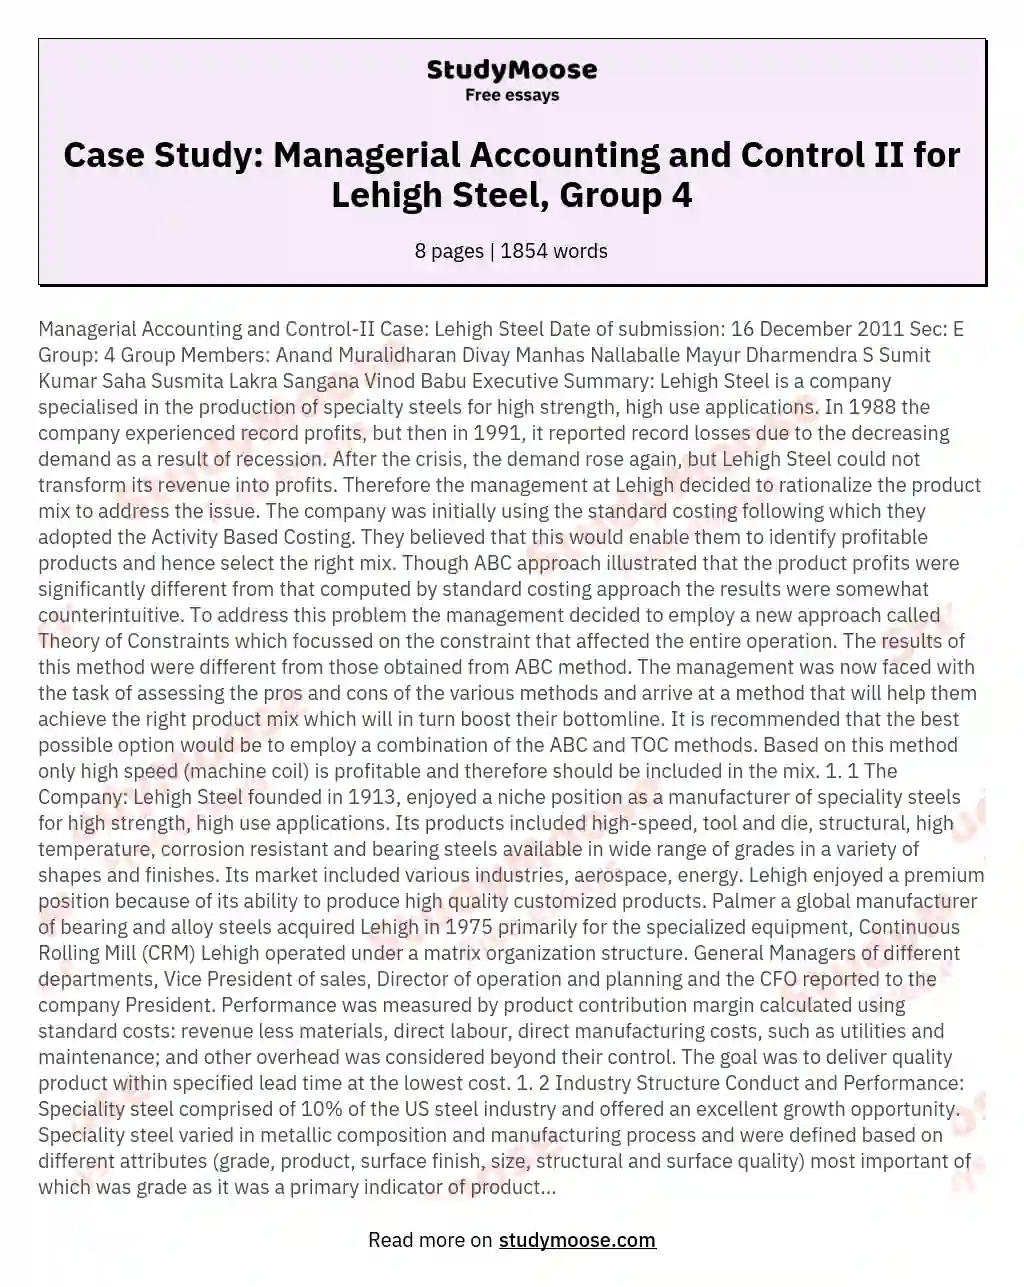 Case Study: Managerial Accounting and Control II for Lehigh Steel, Group 4 essay